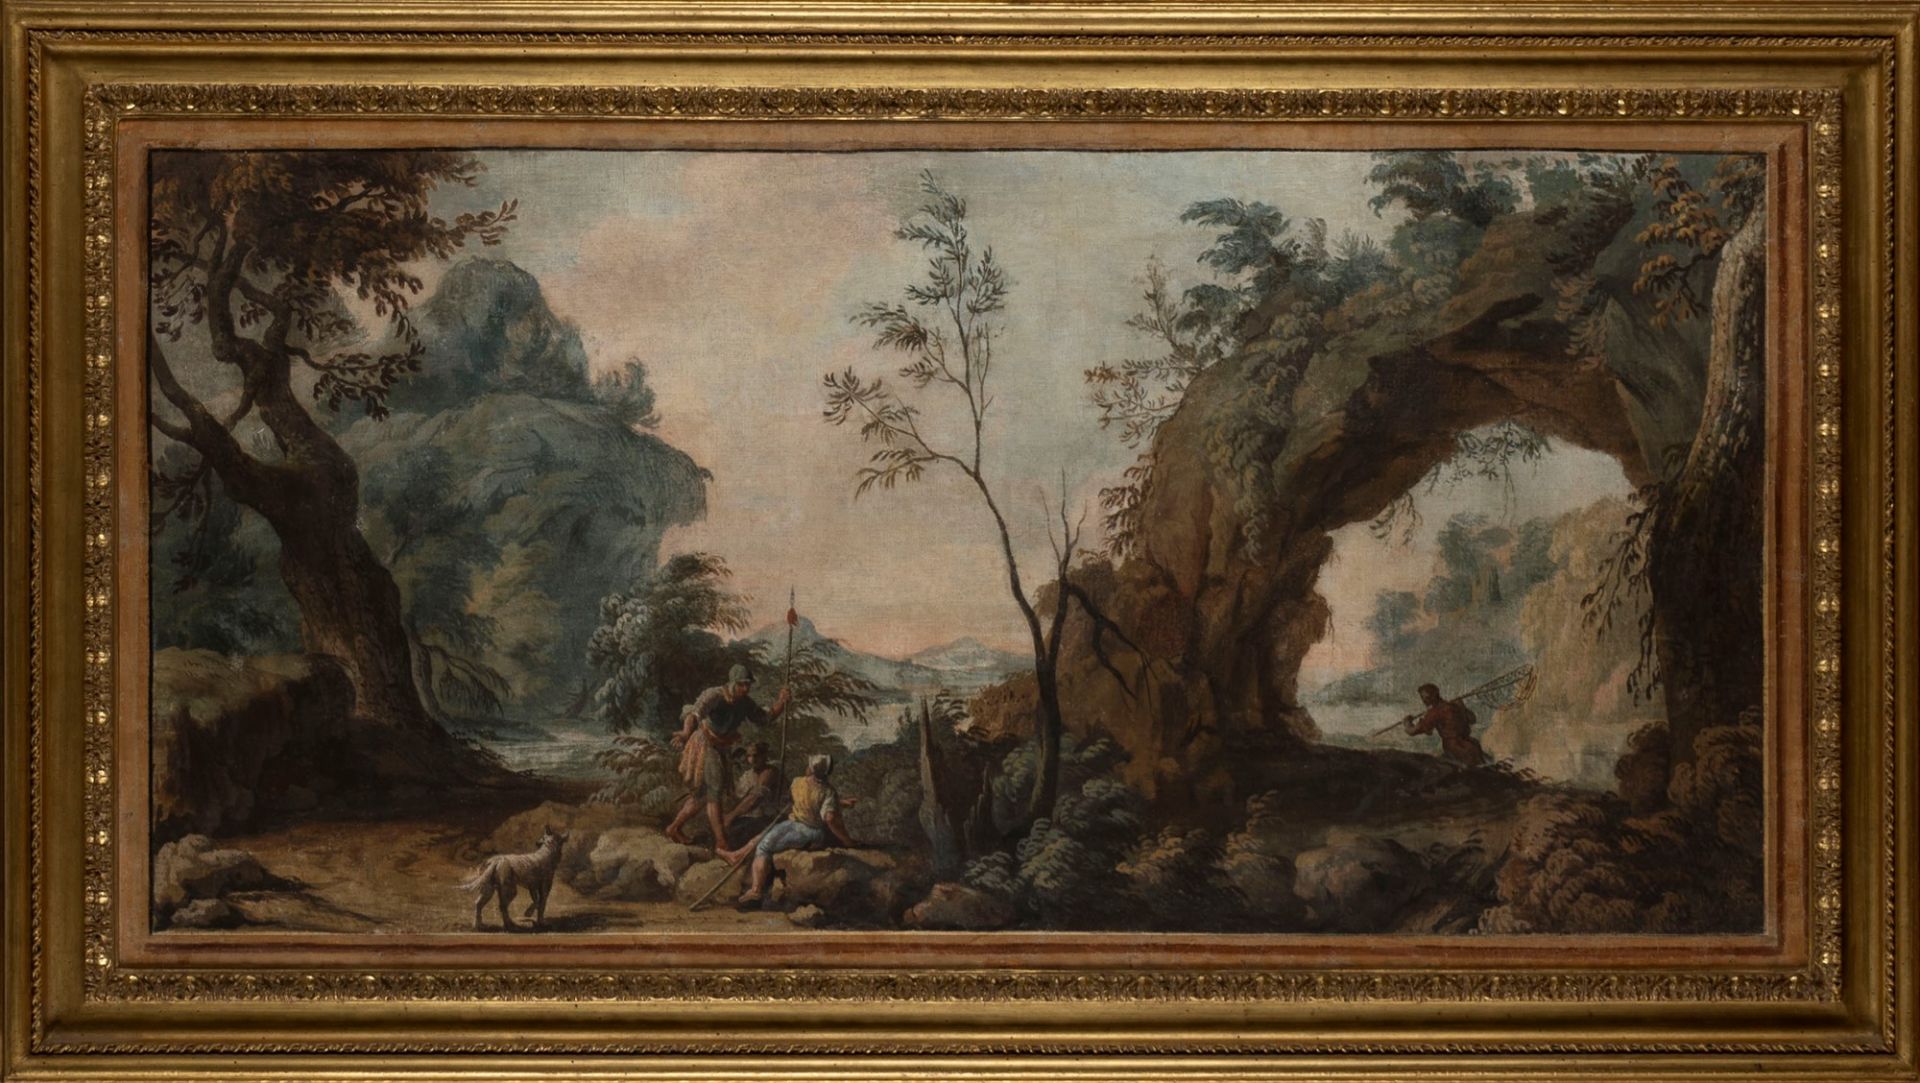 Attributed to Andrea Locatelli (Rome 1695 - 1741) - Landscape with natural arch and resting soldier - Image 2 of 3